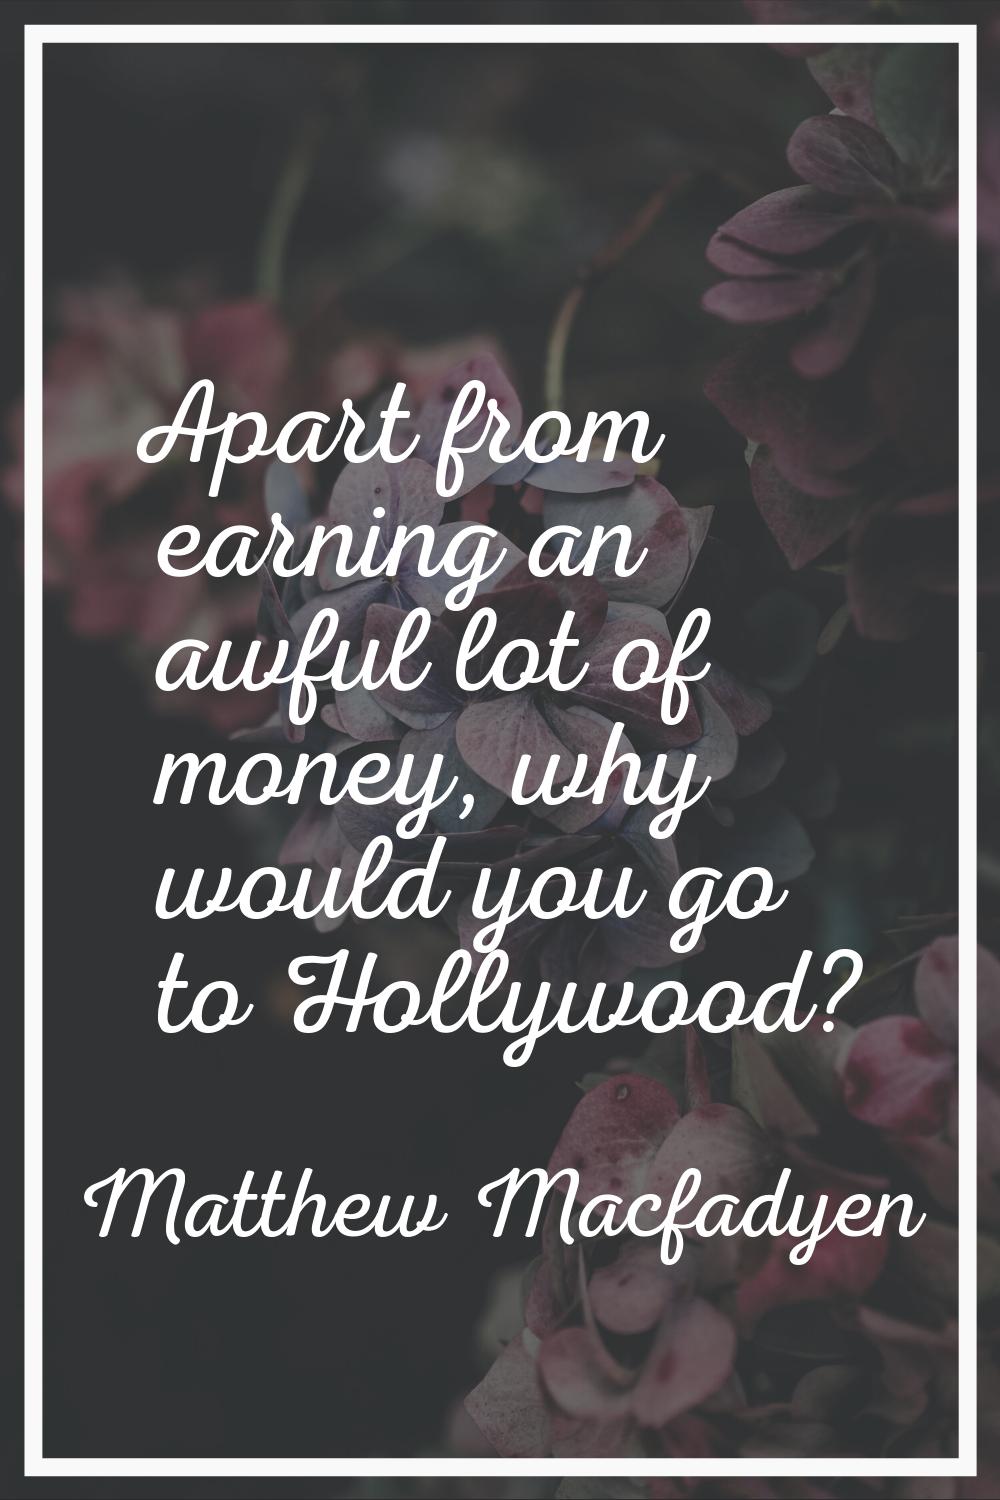 Apart from earning an awful lot of money, why would you go to Hollywood?